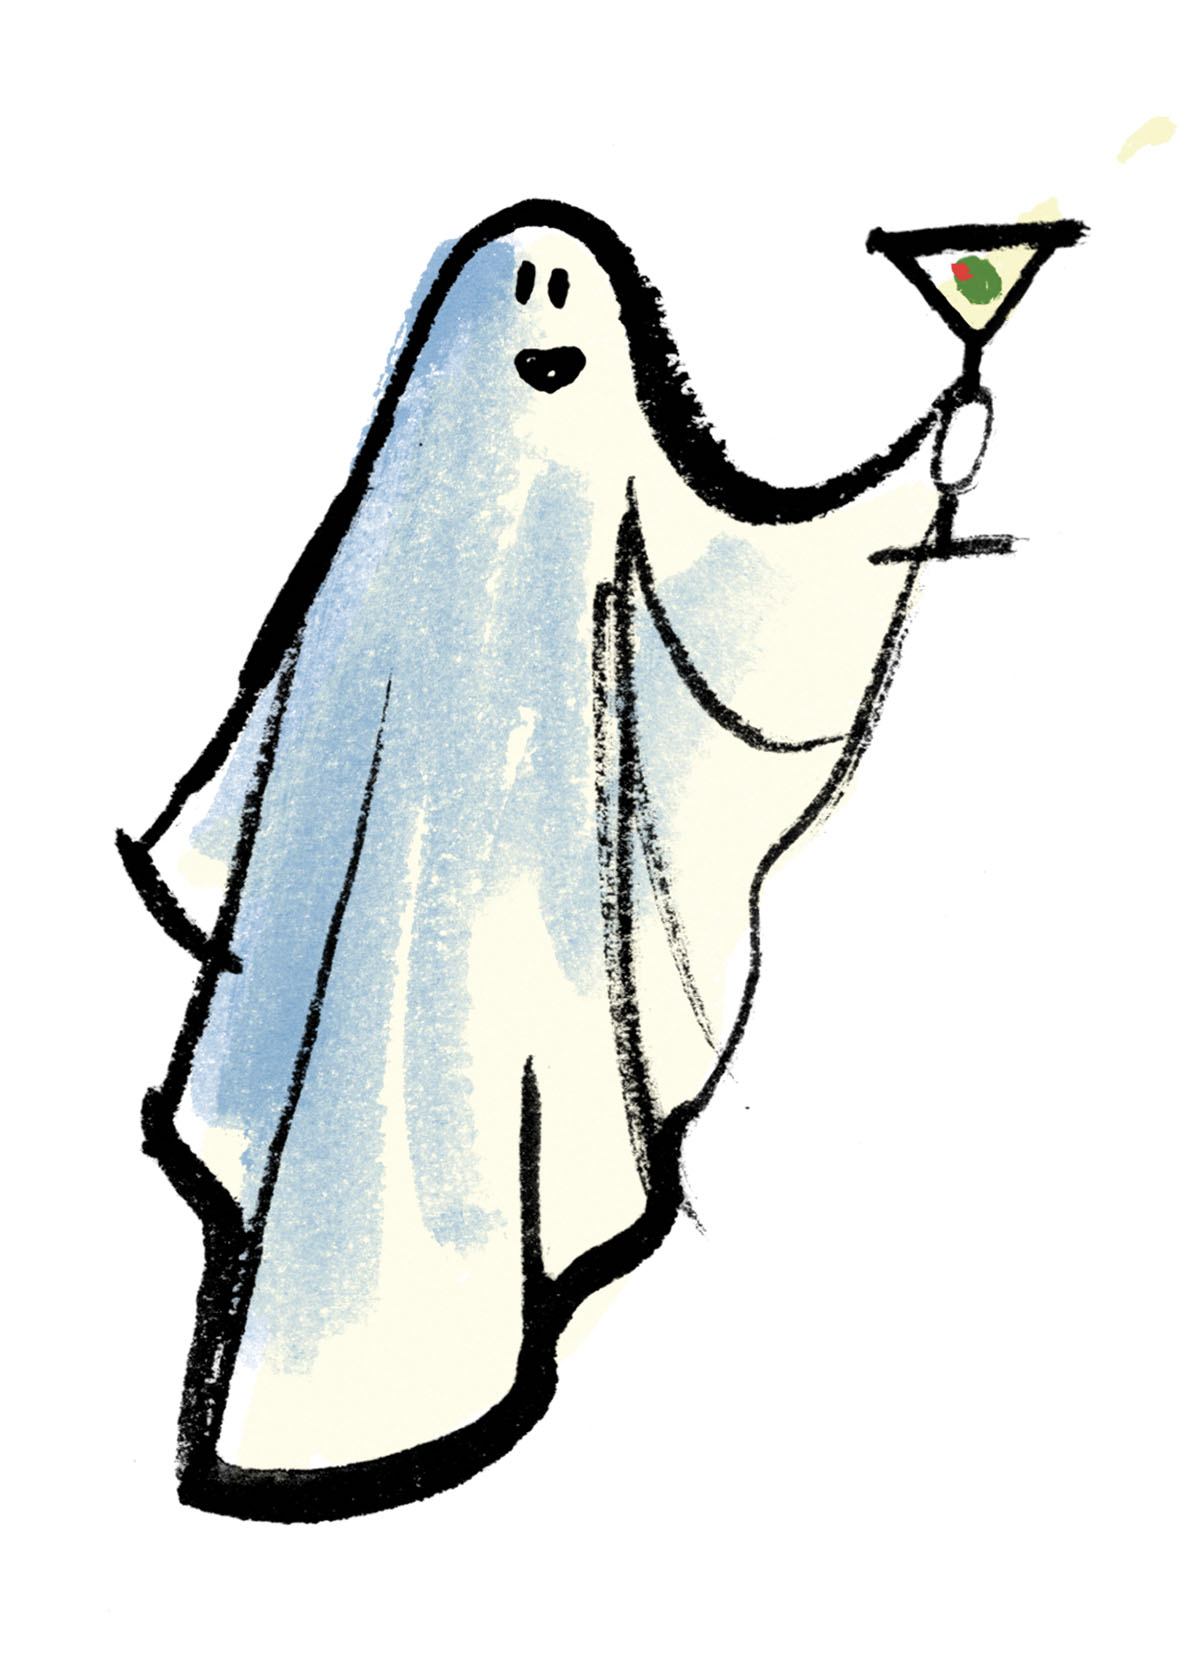 An illustration of a ghost holding a martini